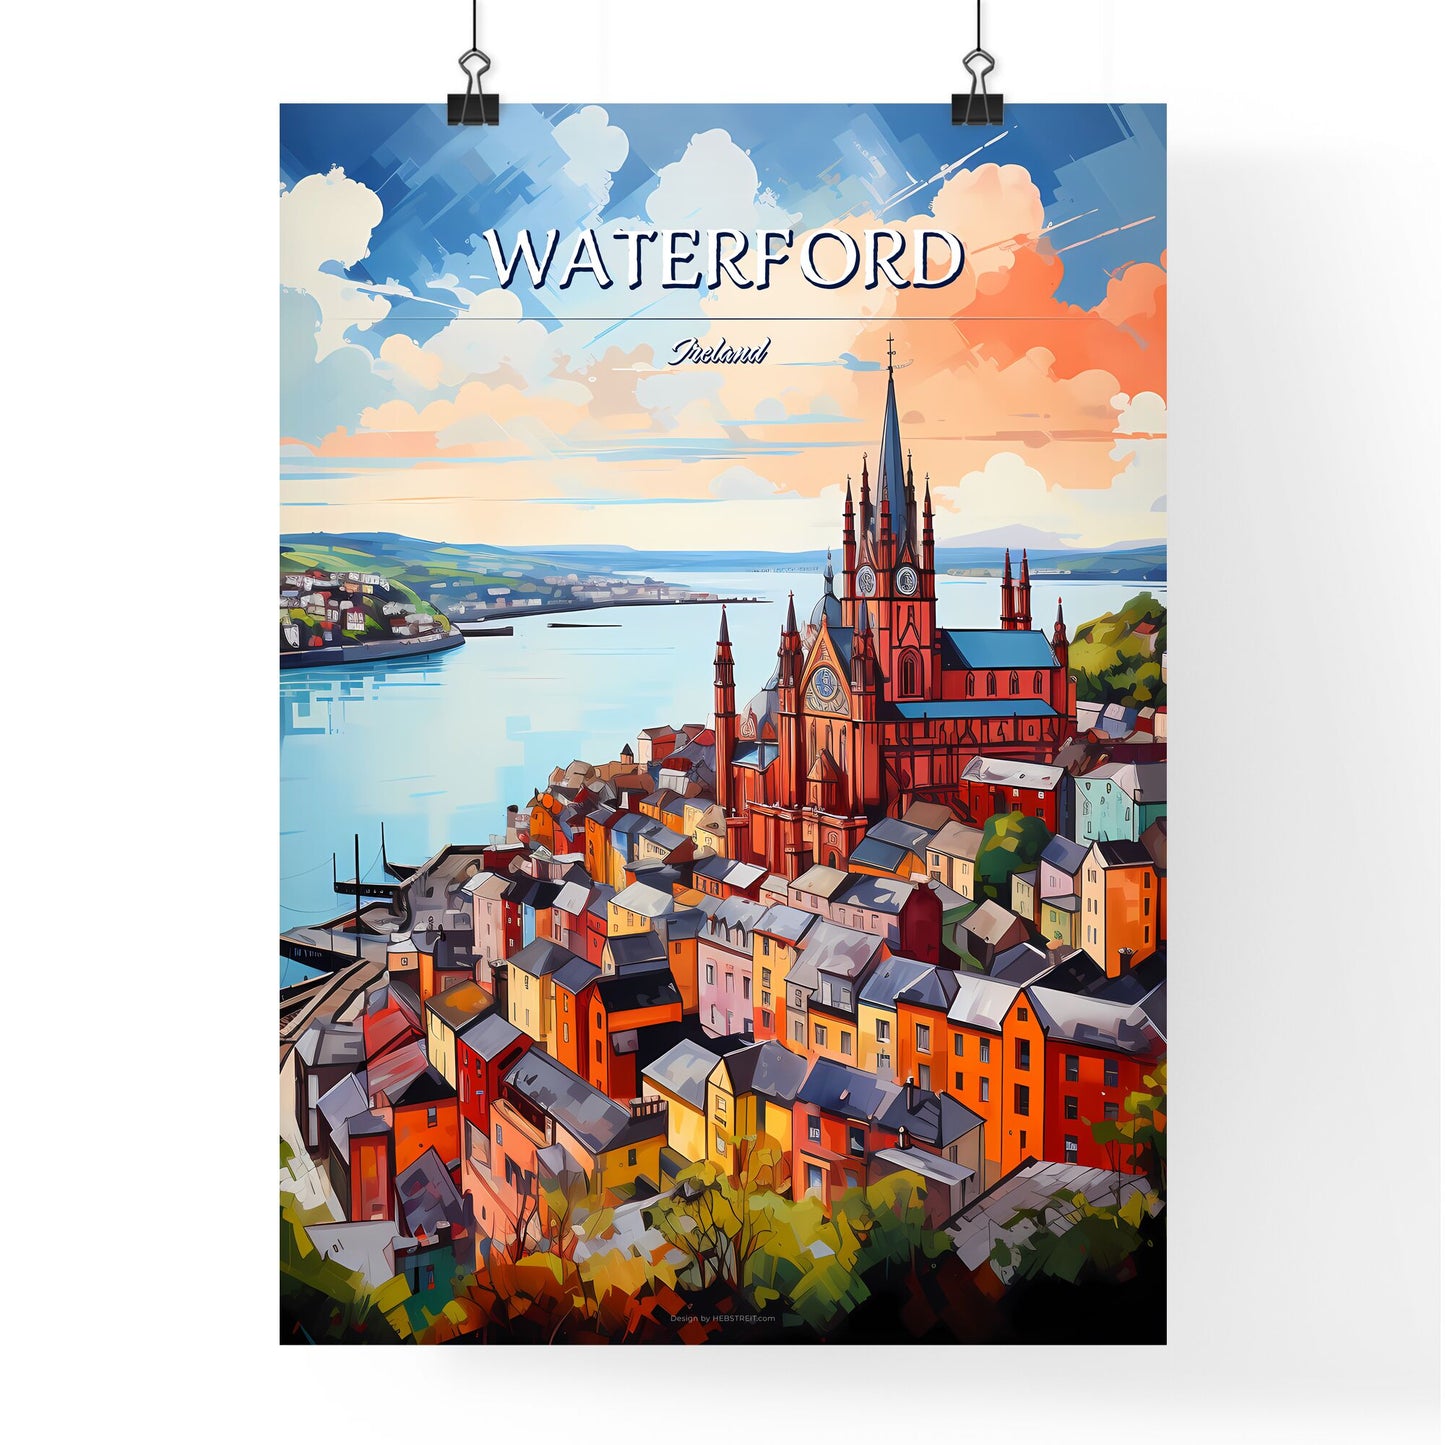 Waterford, Ireland - Art print of a city by the water Default Title